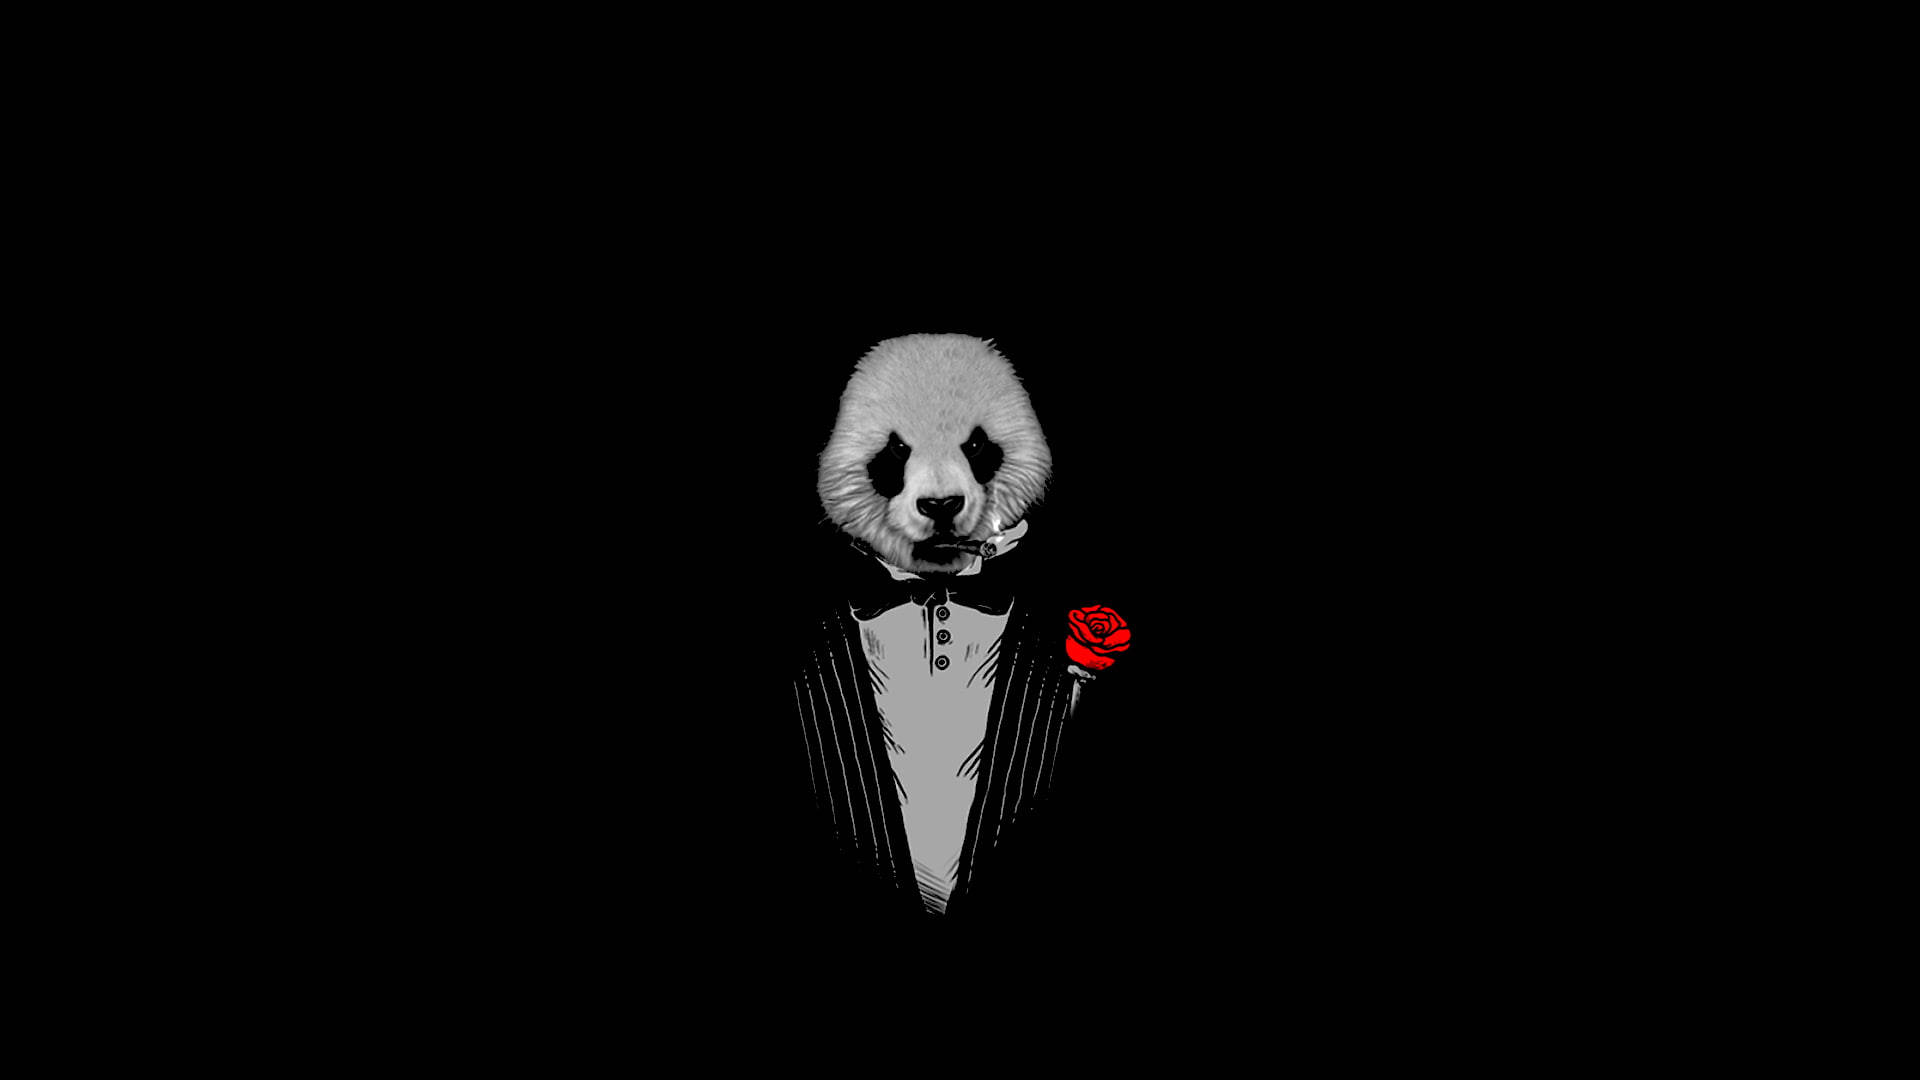 The Godfather Panda In Suit